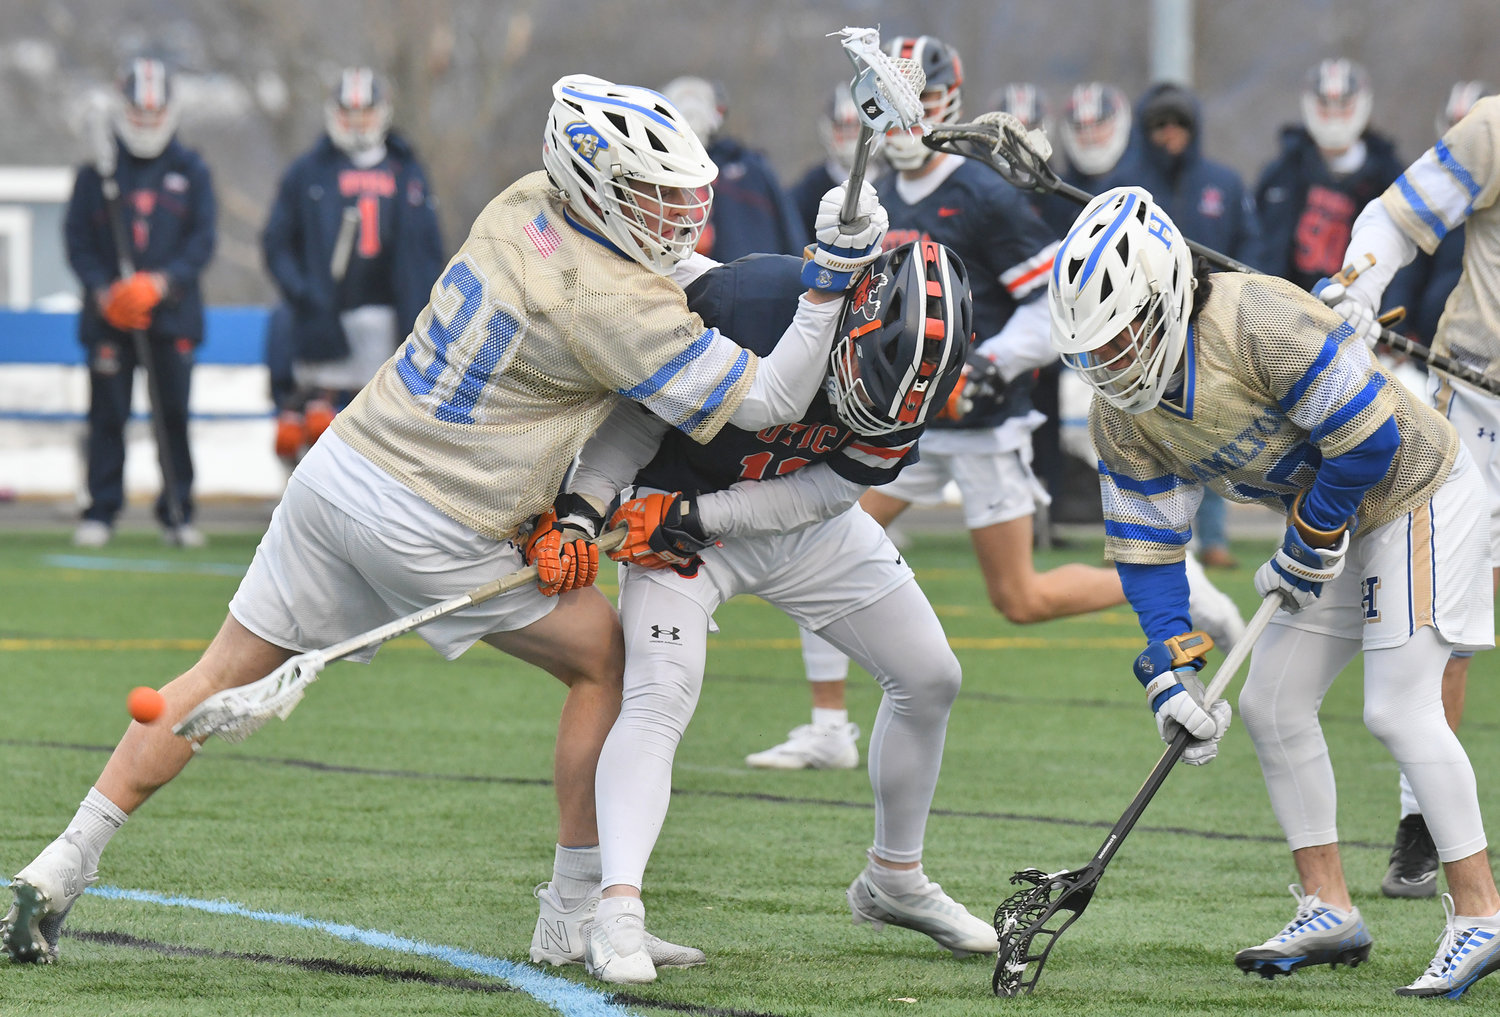 DOUBLE-TEAMED — Hamilton College’s Kyle Mannherz, left, and teammate Zach Lucchini, right, smother Utica University’s Sam Serrano as he tries to get a shot on goal in the first quarter of Tuesday’s men's lacrosse game at Hamilton College’s Withiam Field in Clinton. Serrano scored a pair of goals, but Hamilton rolled to a 20-5 win in the 23rd playing of the Contineer Cup.